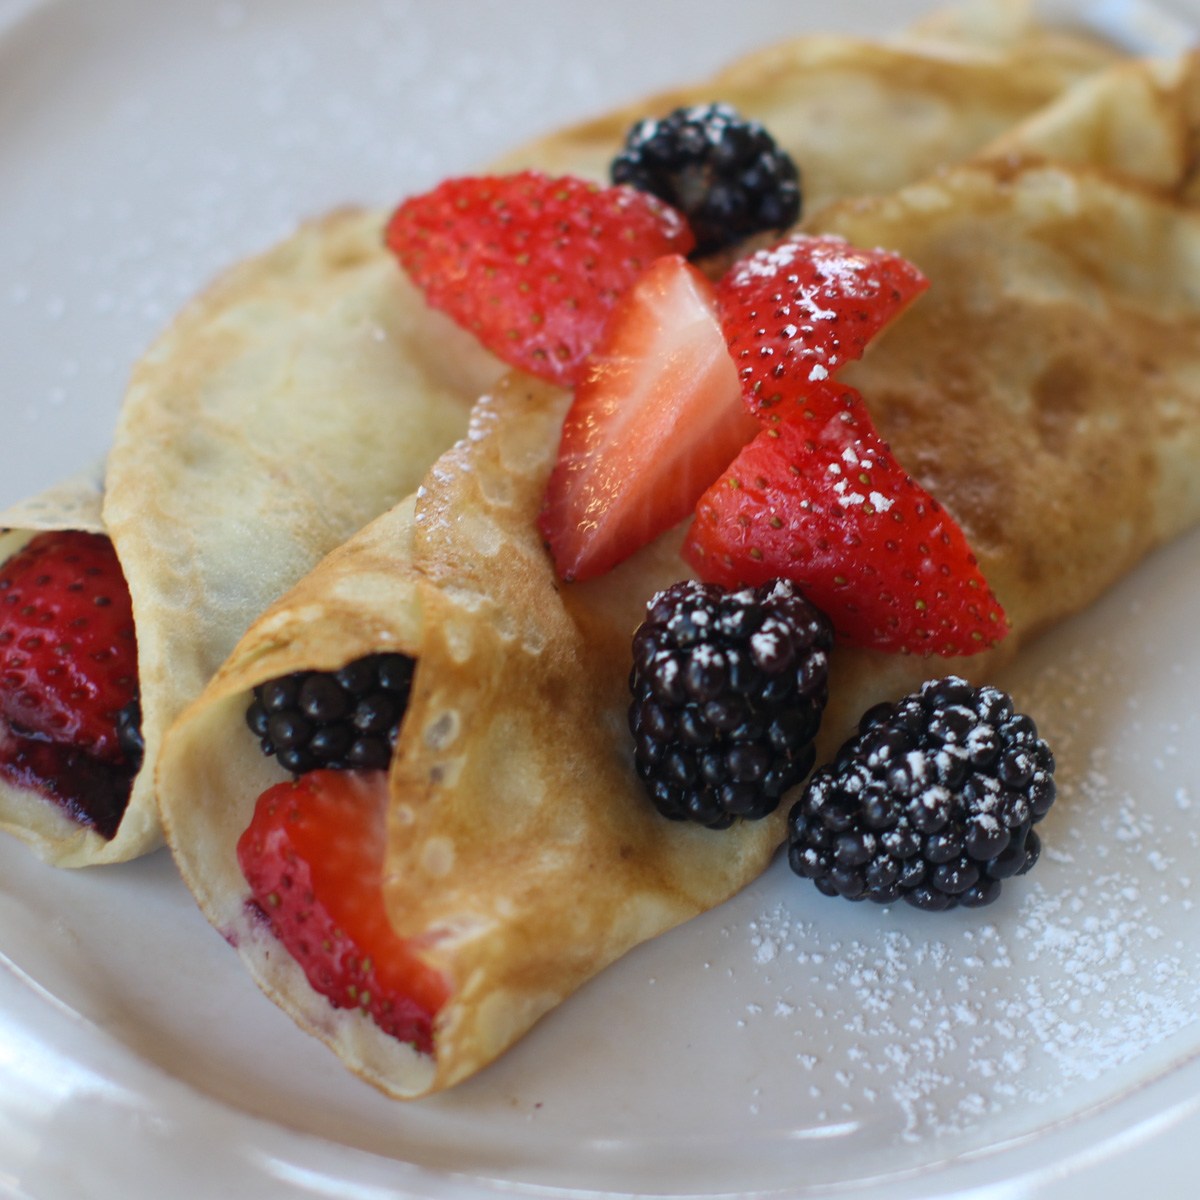 Strawberry and Blackberry rolled into crepes and more on top with powdered sugar.